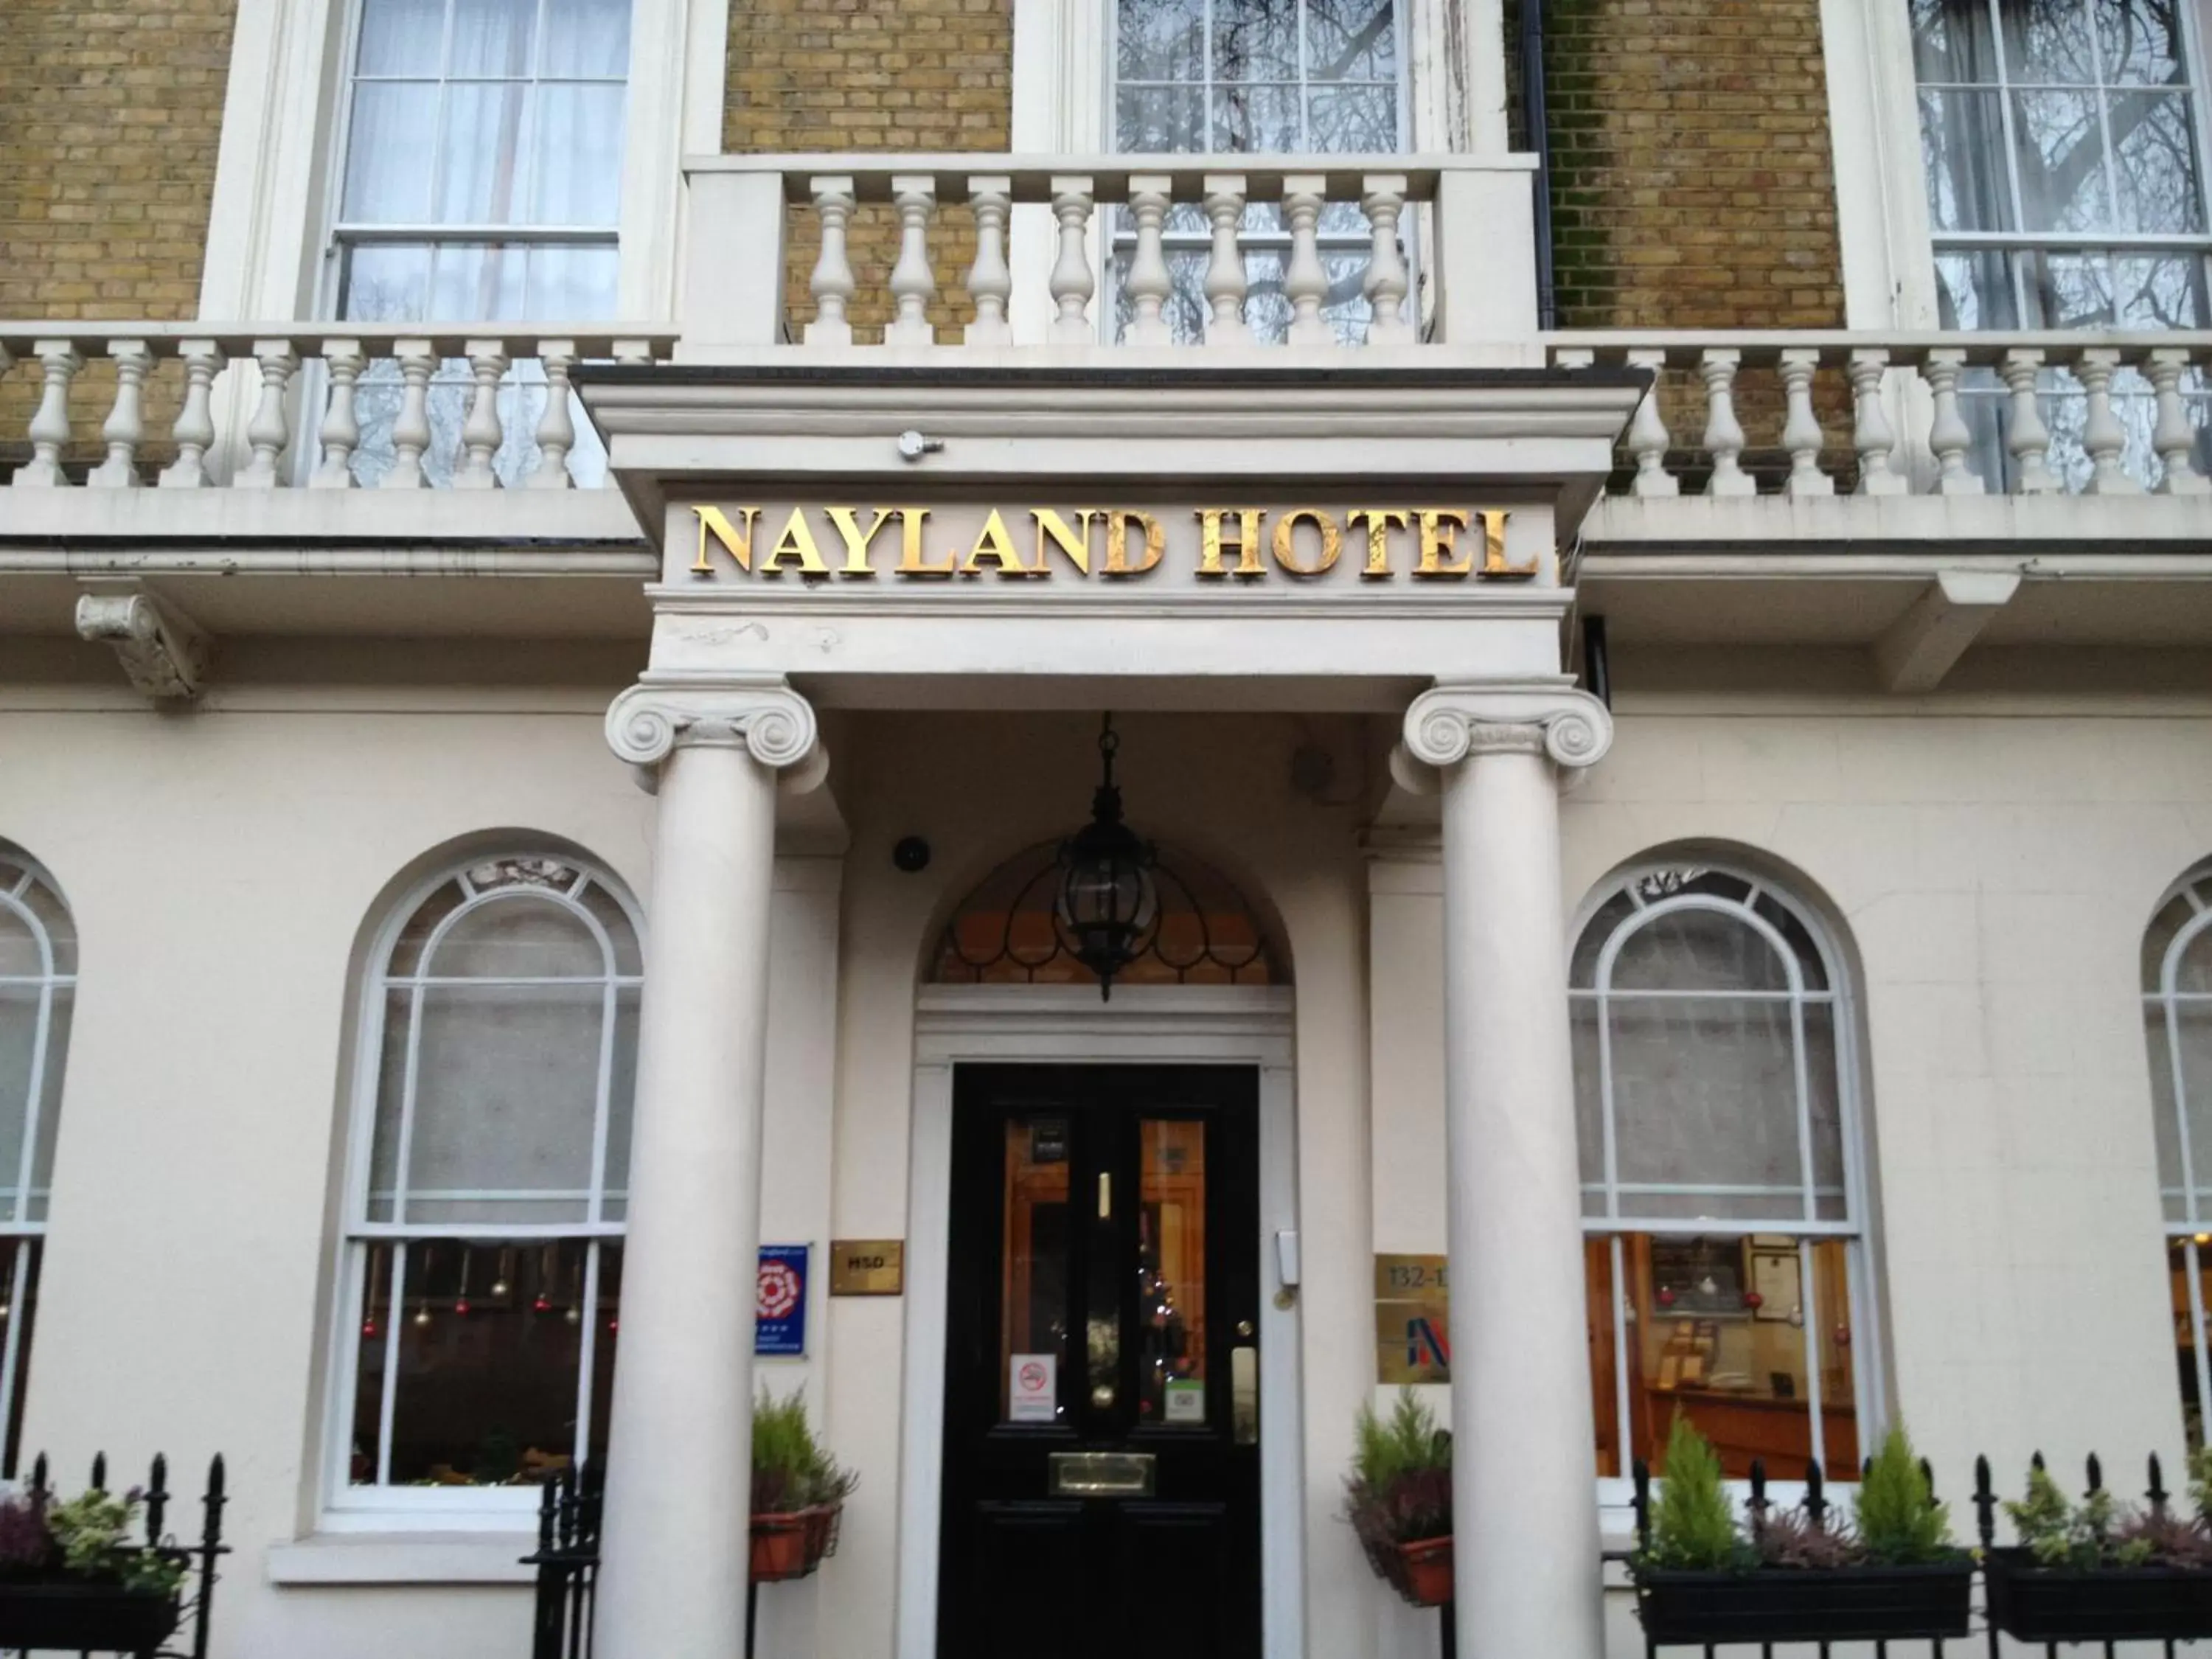 Facade/entrance in The Nayland Hotel